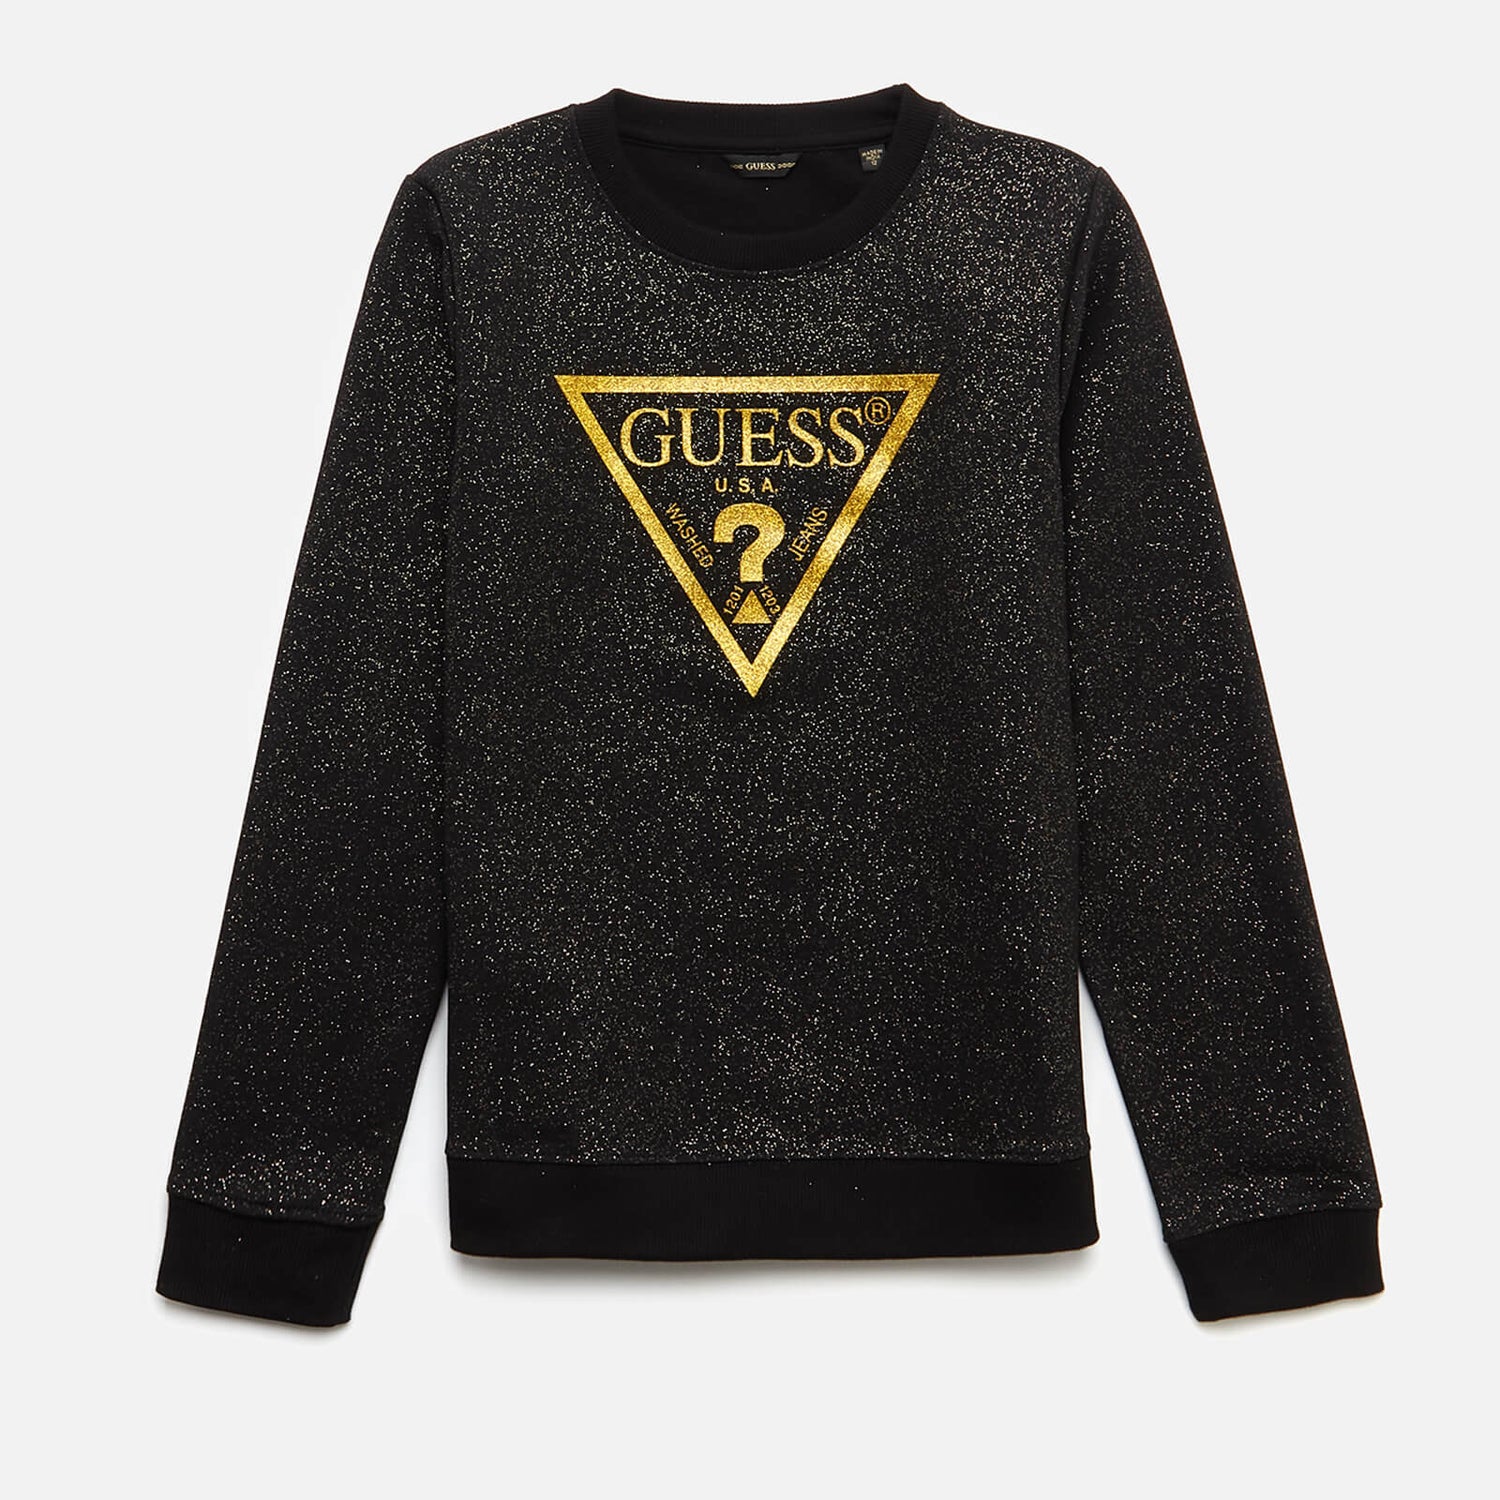 Guess Girls' Sparkly Long Sleeved Sweatshirt - Black - 8 Years